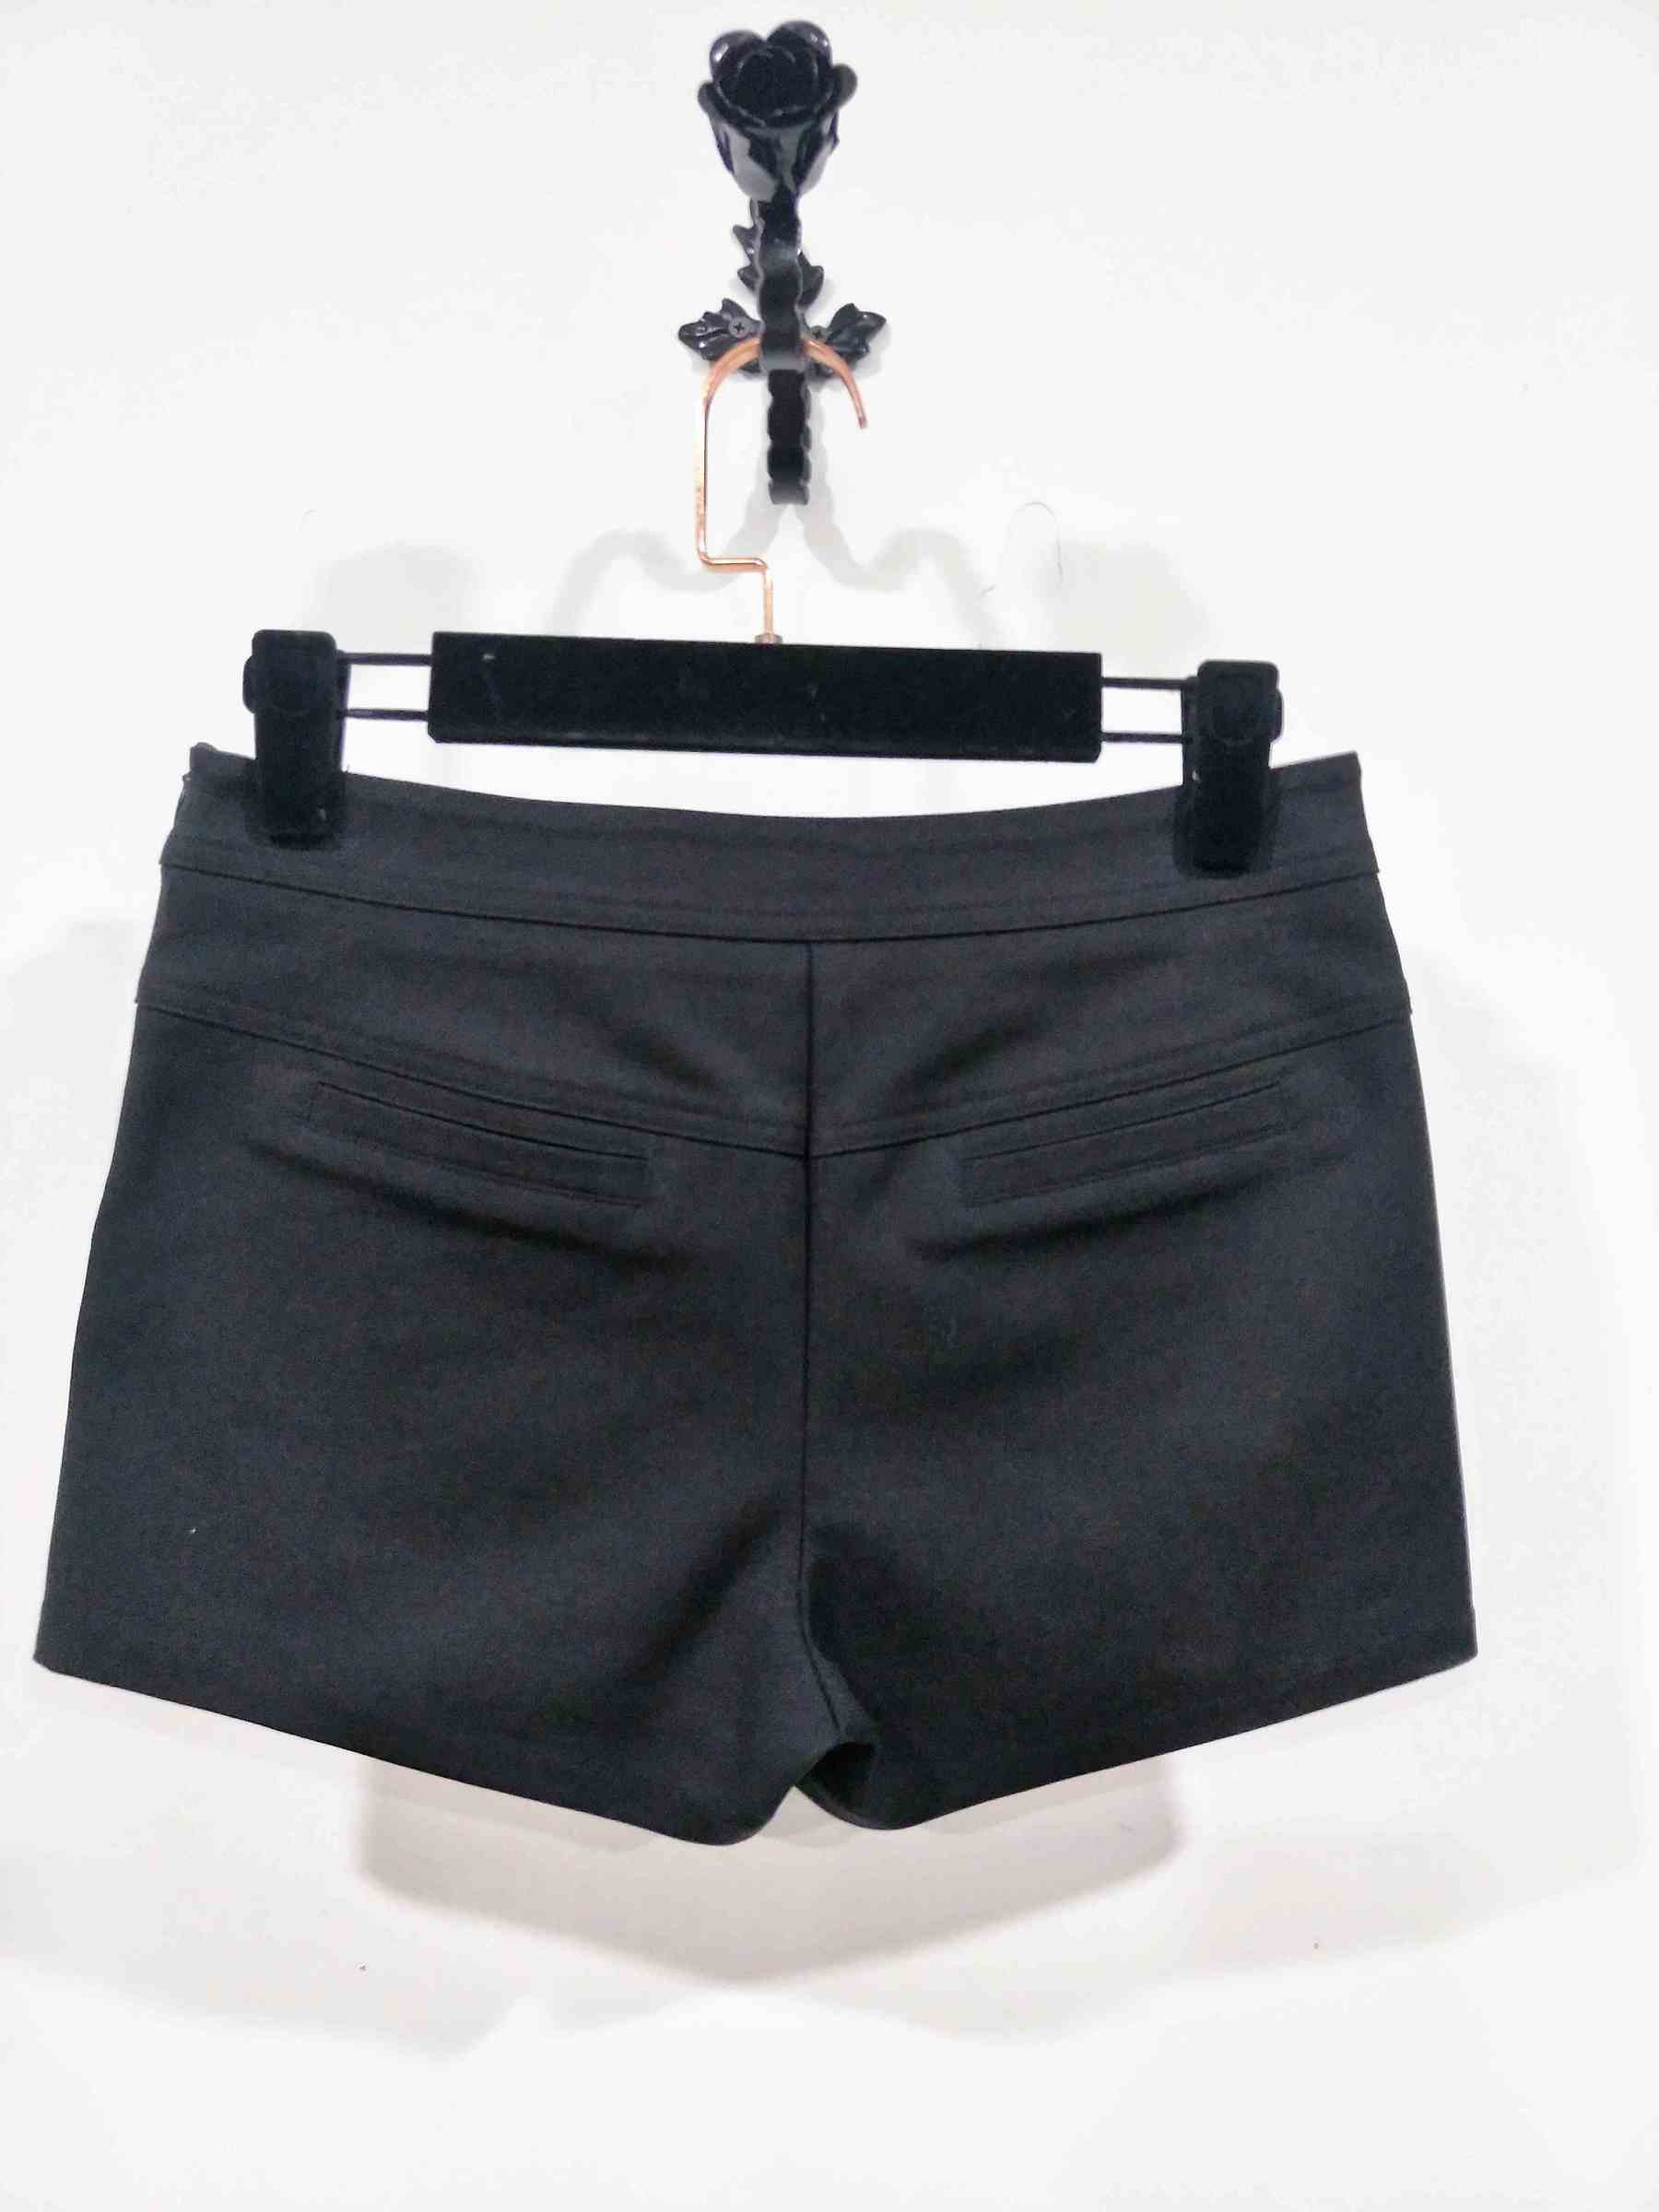 Latest Black shorts with Wide leg shorts ladies woman for high waisted shorts factory made ODM OEM (1).jpg